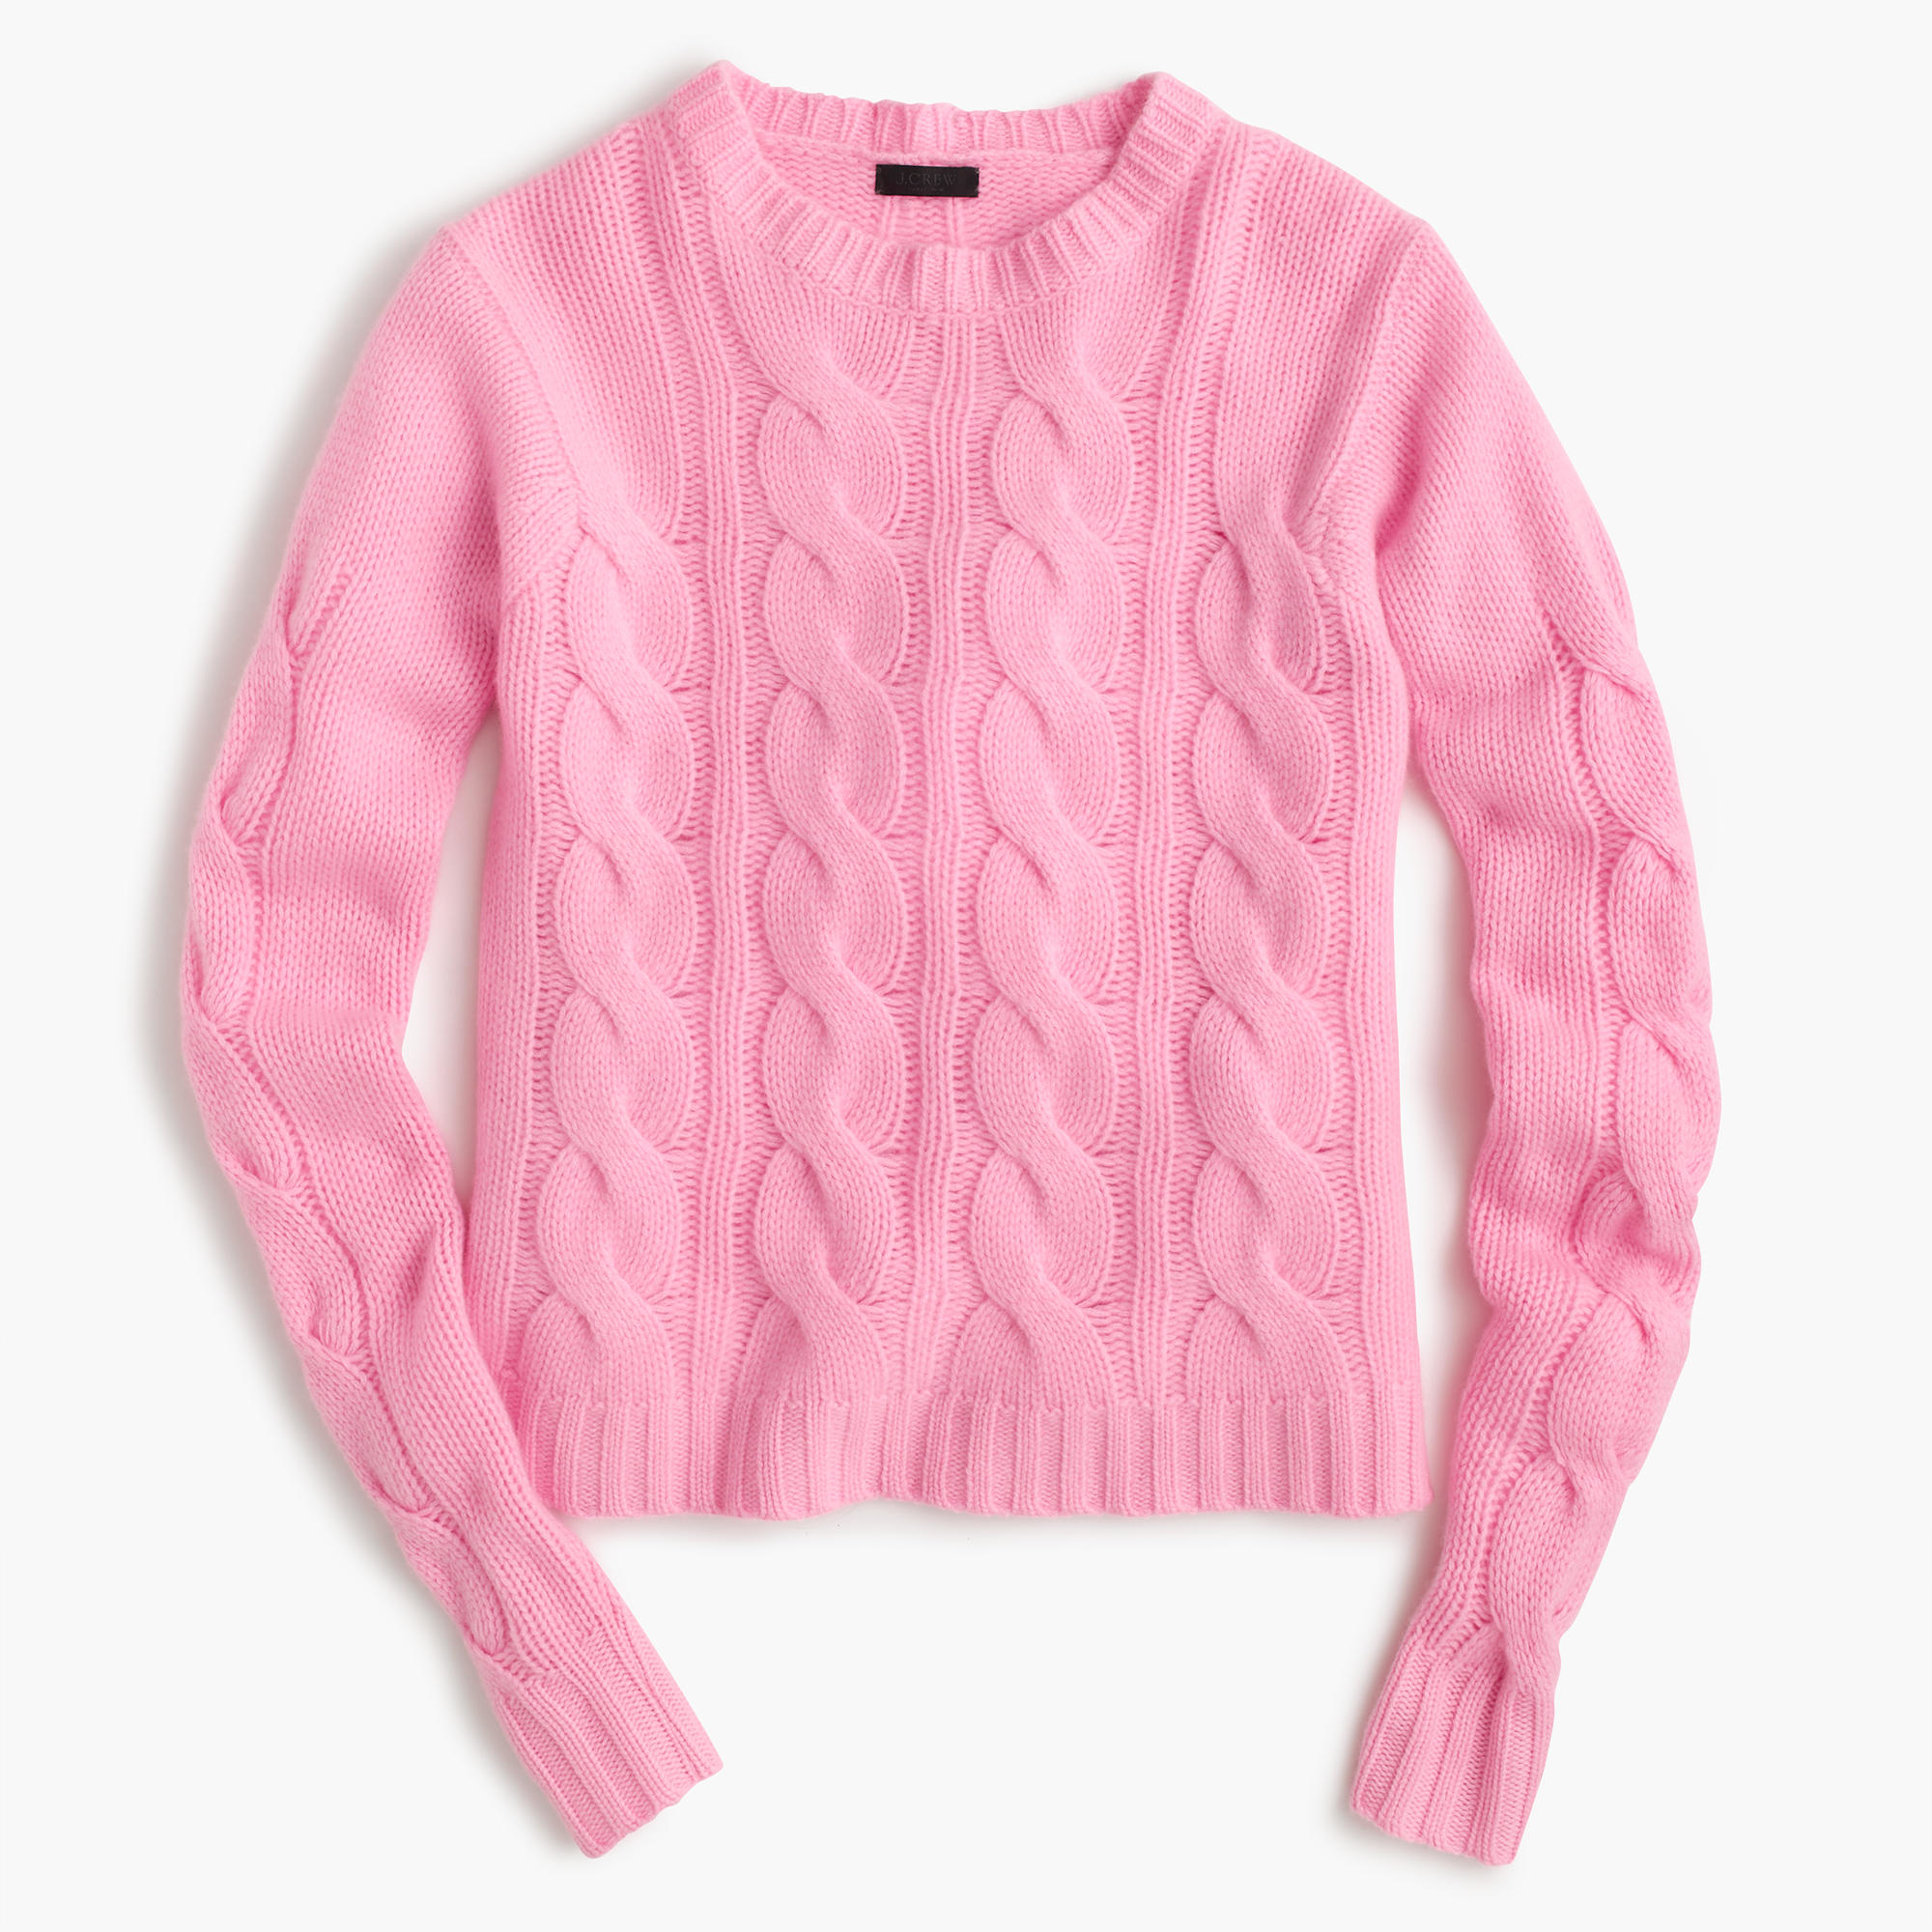 J.crew Italian Cashmere Cable Sweater in Pink | Lyst